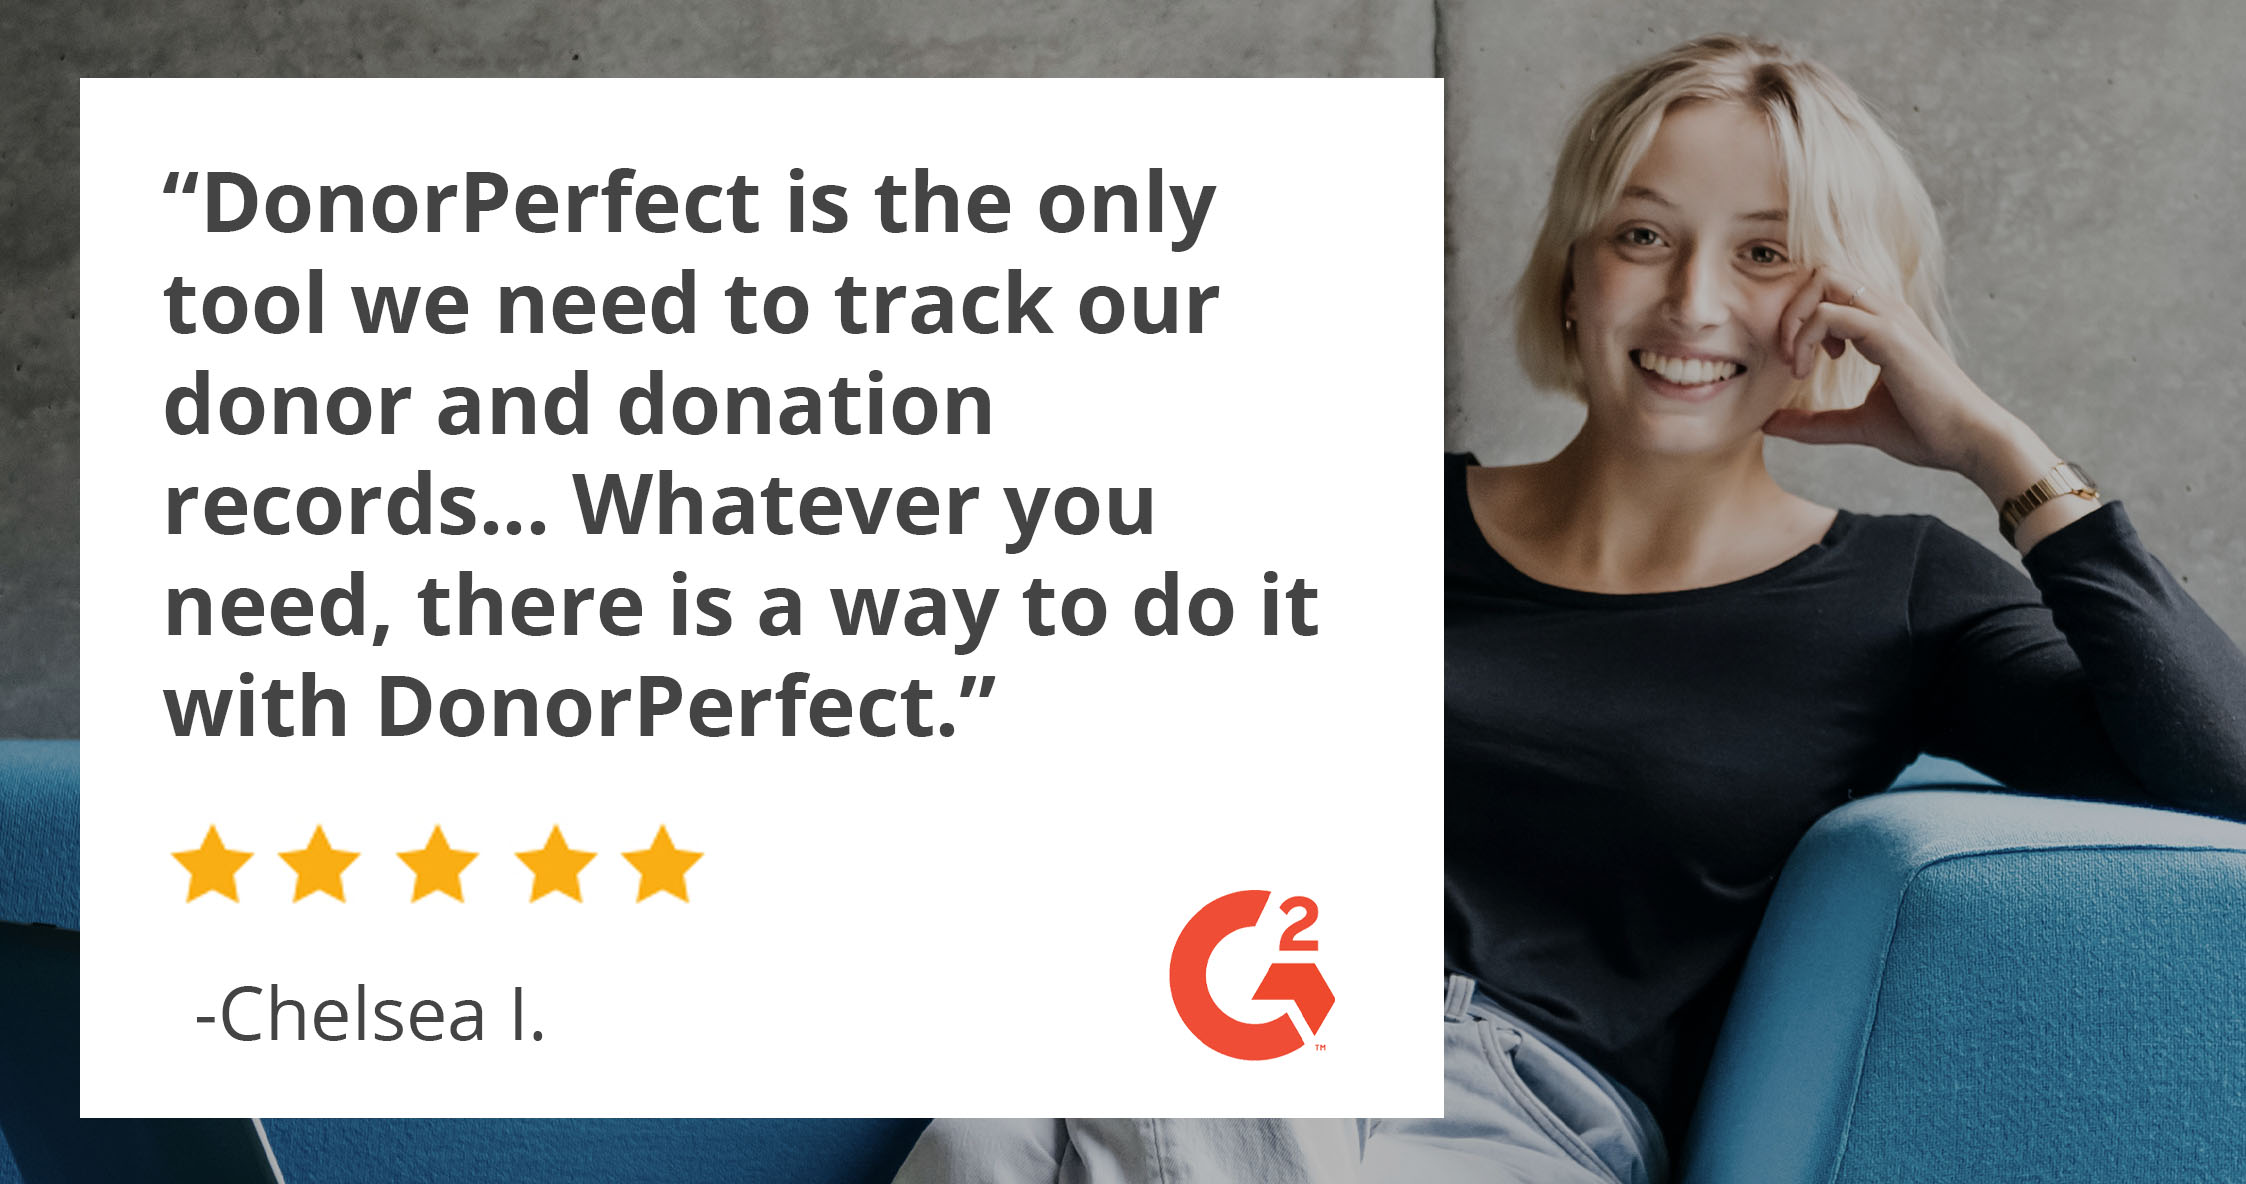 "DonorPerfect is the only tool we need to track our donor and donation records..." -Chelsea I.